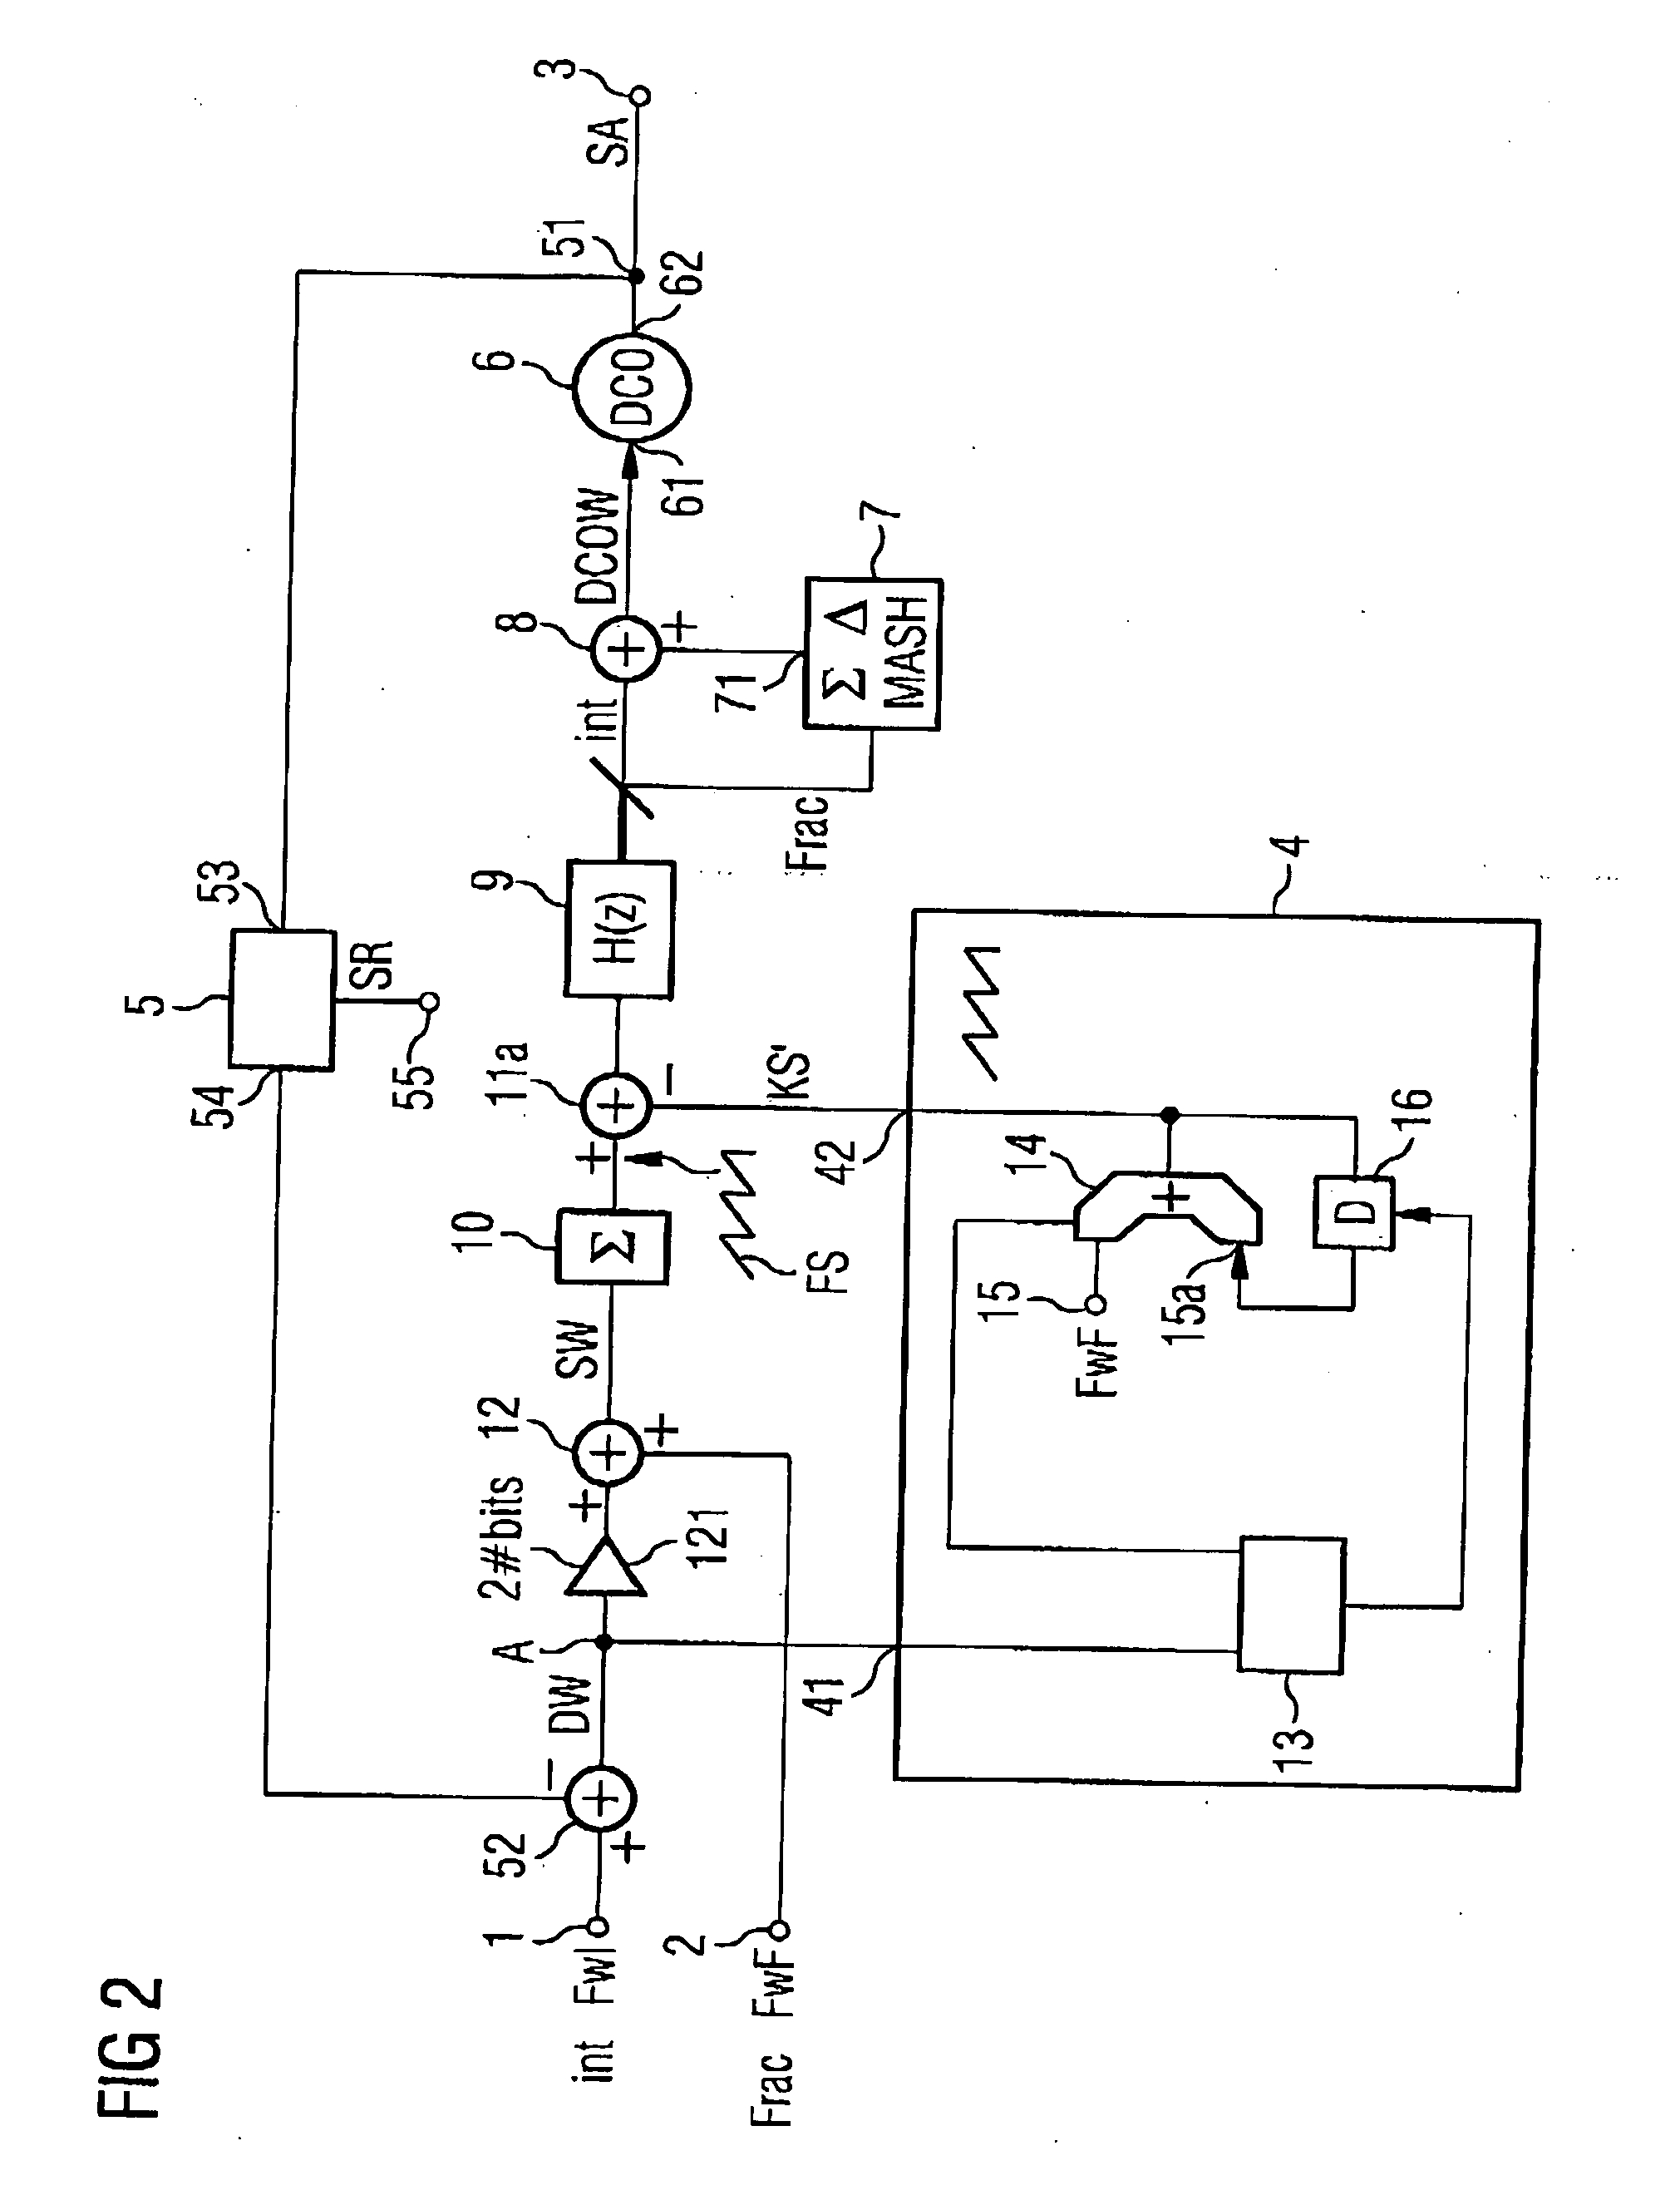 Digital phase locked loop and method for correcting interference components in a phase locked loop